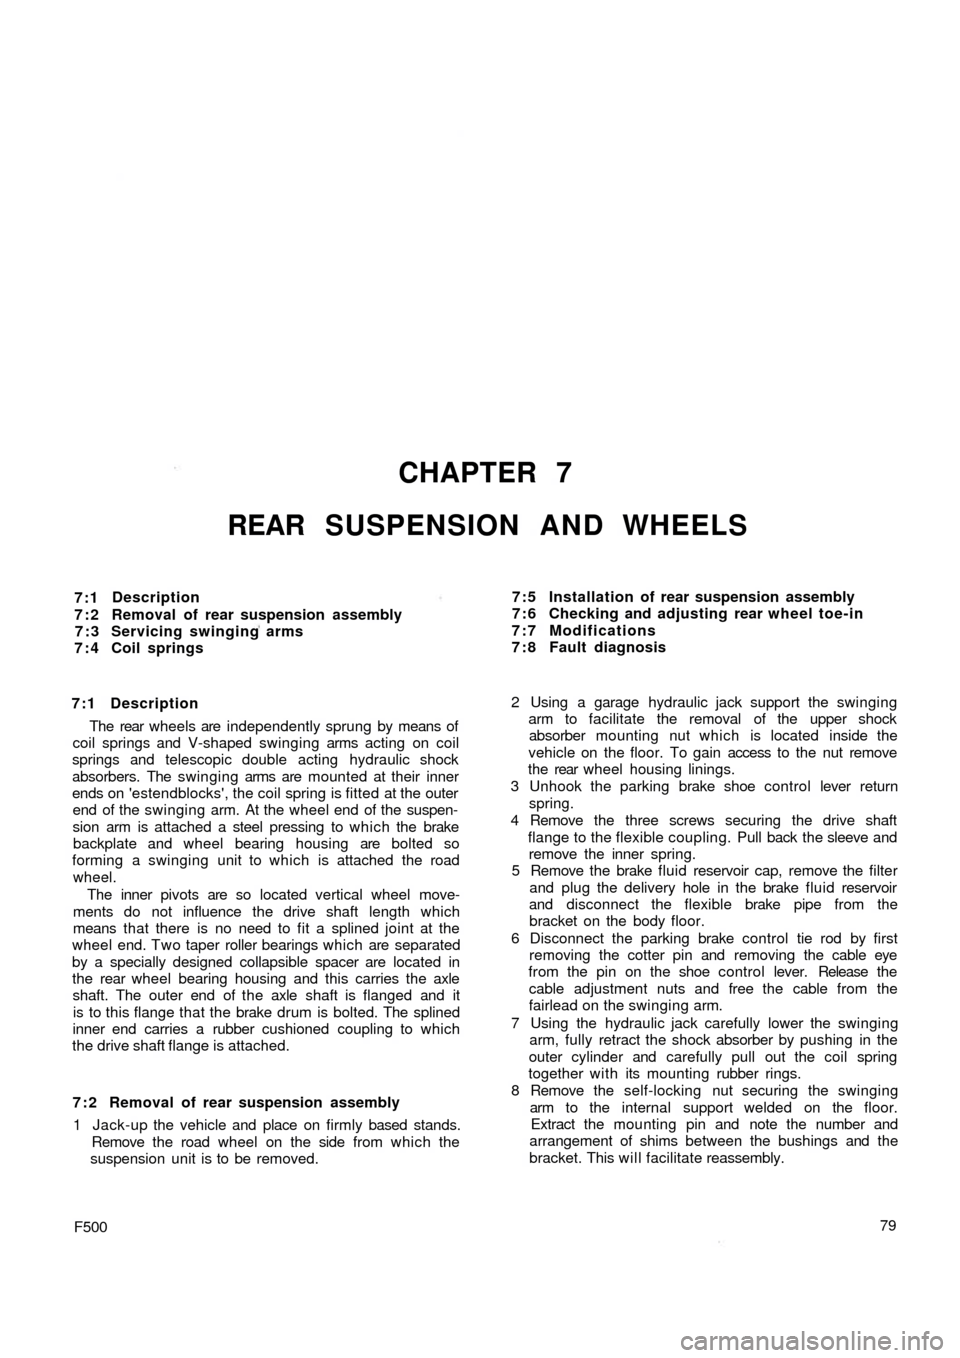 FIAT 500 1973 1.G Workshop Manual CHAPTER 7
REAR SUSPENSION AND WHEELS
7:1
7:2
7:3
7:4Description
Removal of rear suspension assembly
Servicing swinging arms
Coil springs
7:1 Description
The  rear  wheels are independently sprung by m